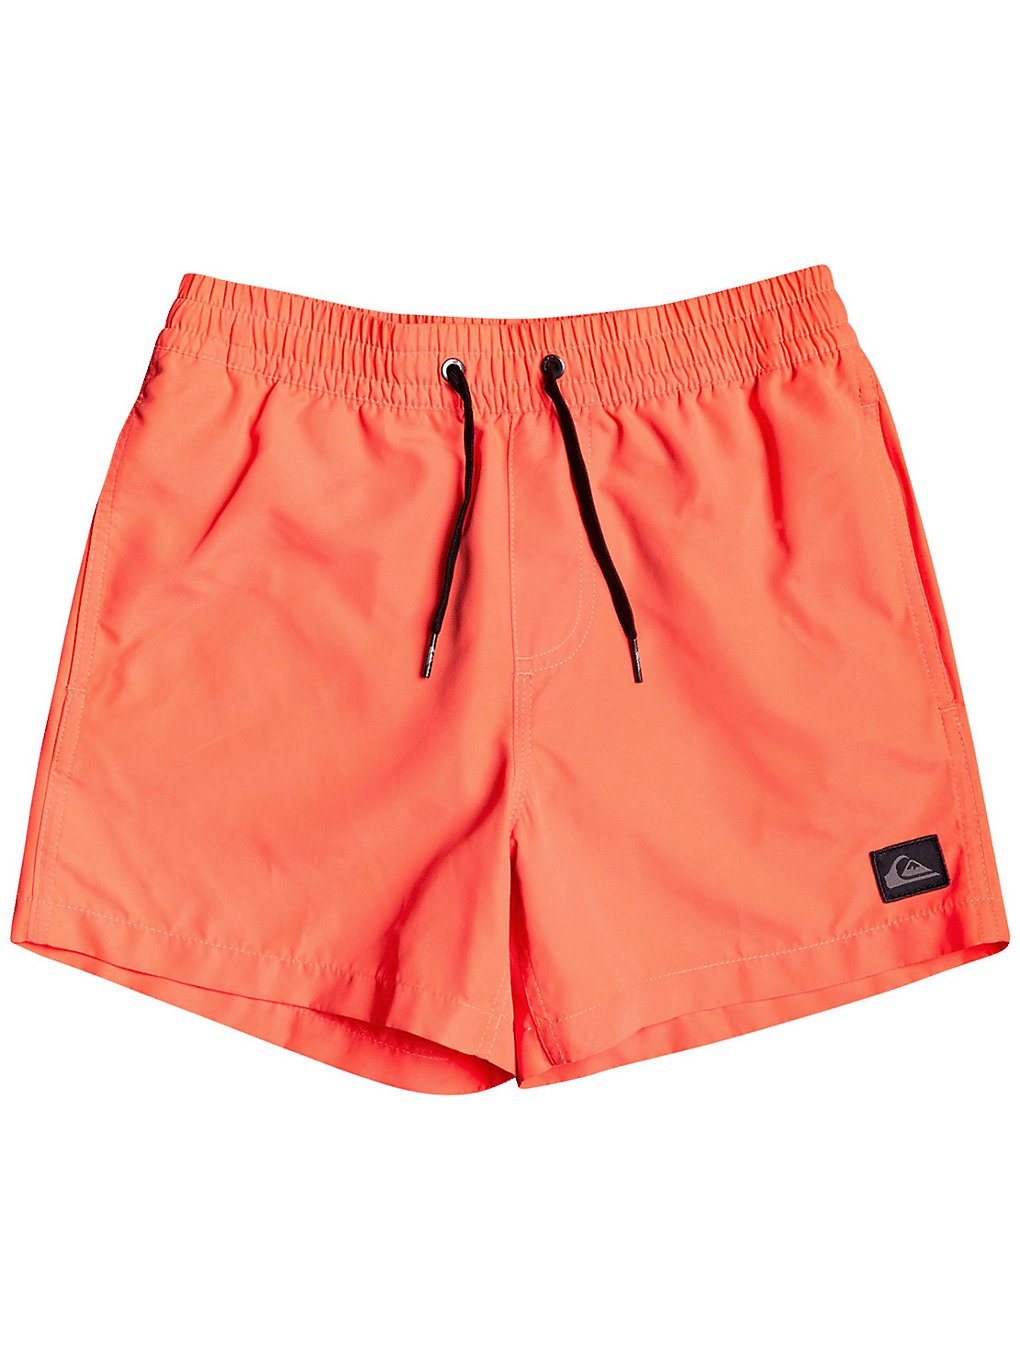 Quiksilver Everyday Volley 13 Boardshorts fiery coral